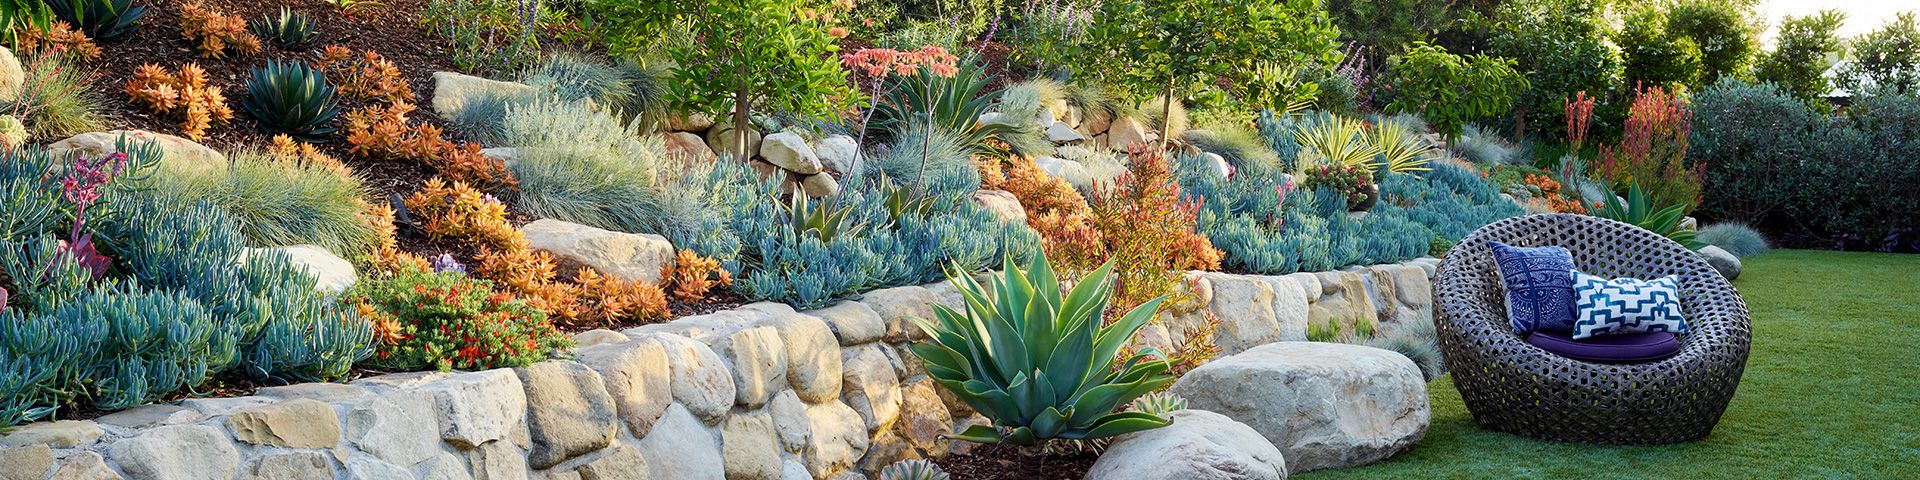 outdoor landscaping category page